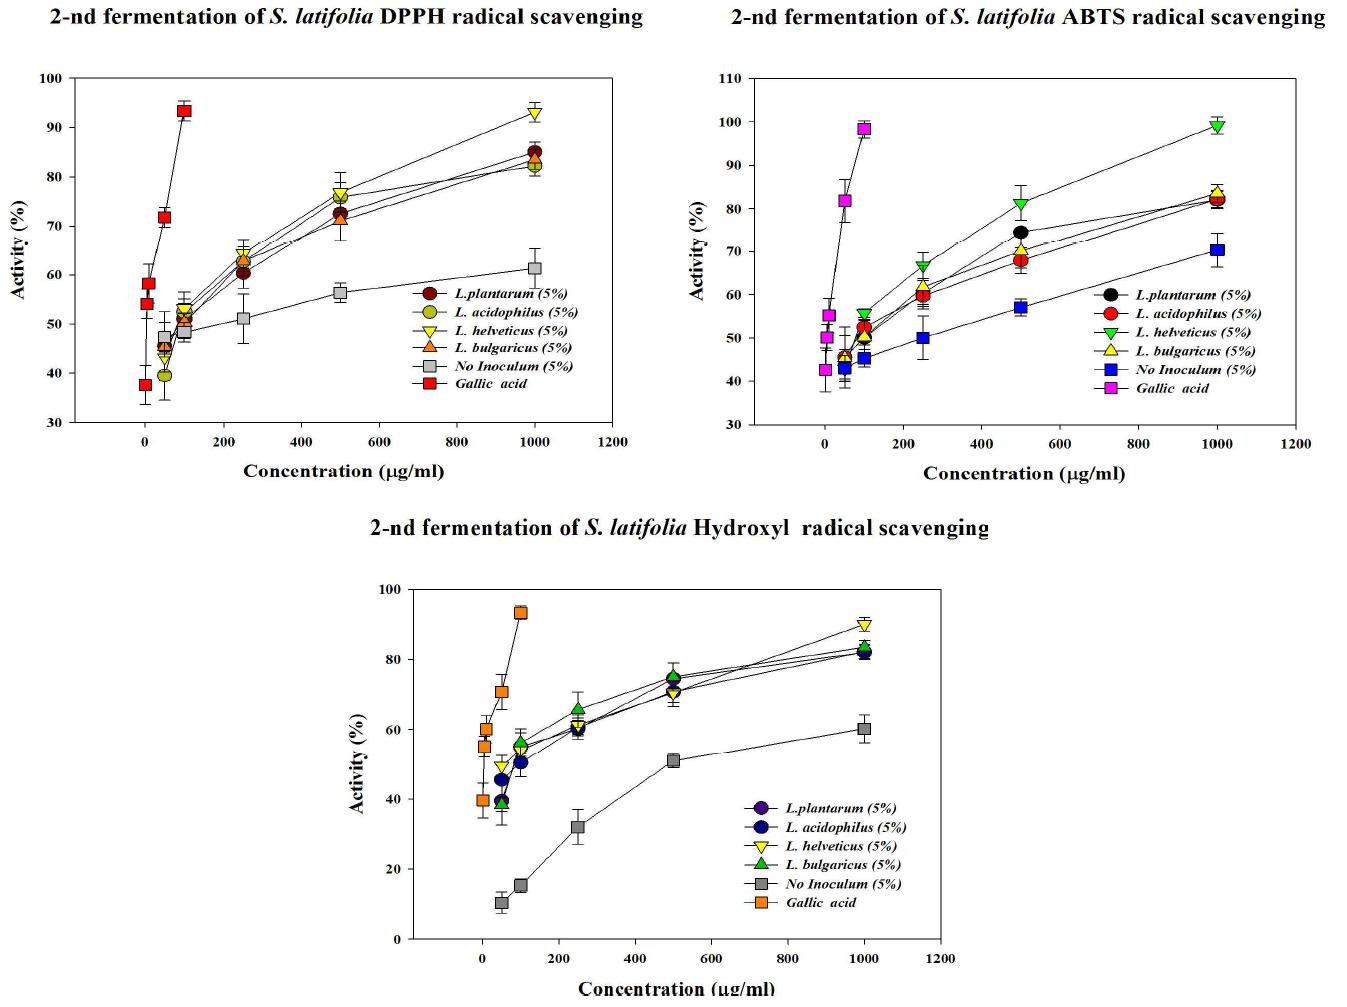 Concentration dependence of anti-oxidant activity of 2nd fermentation sample.